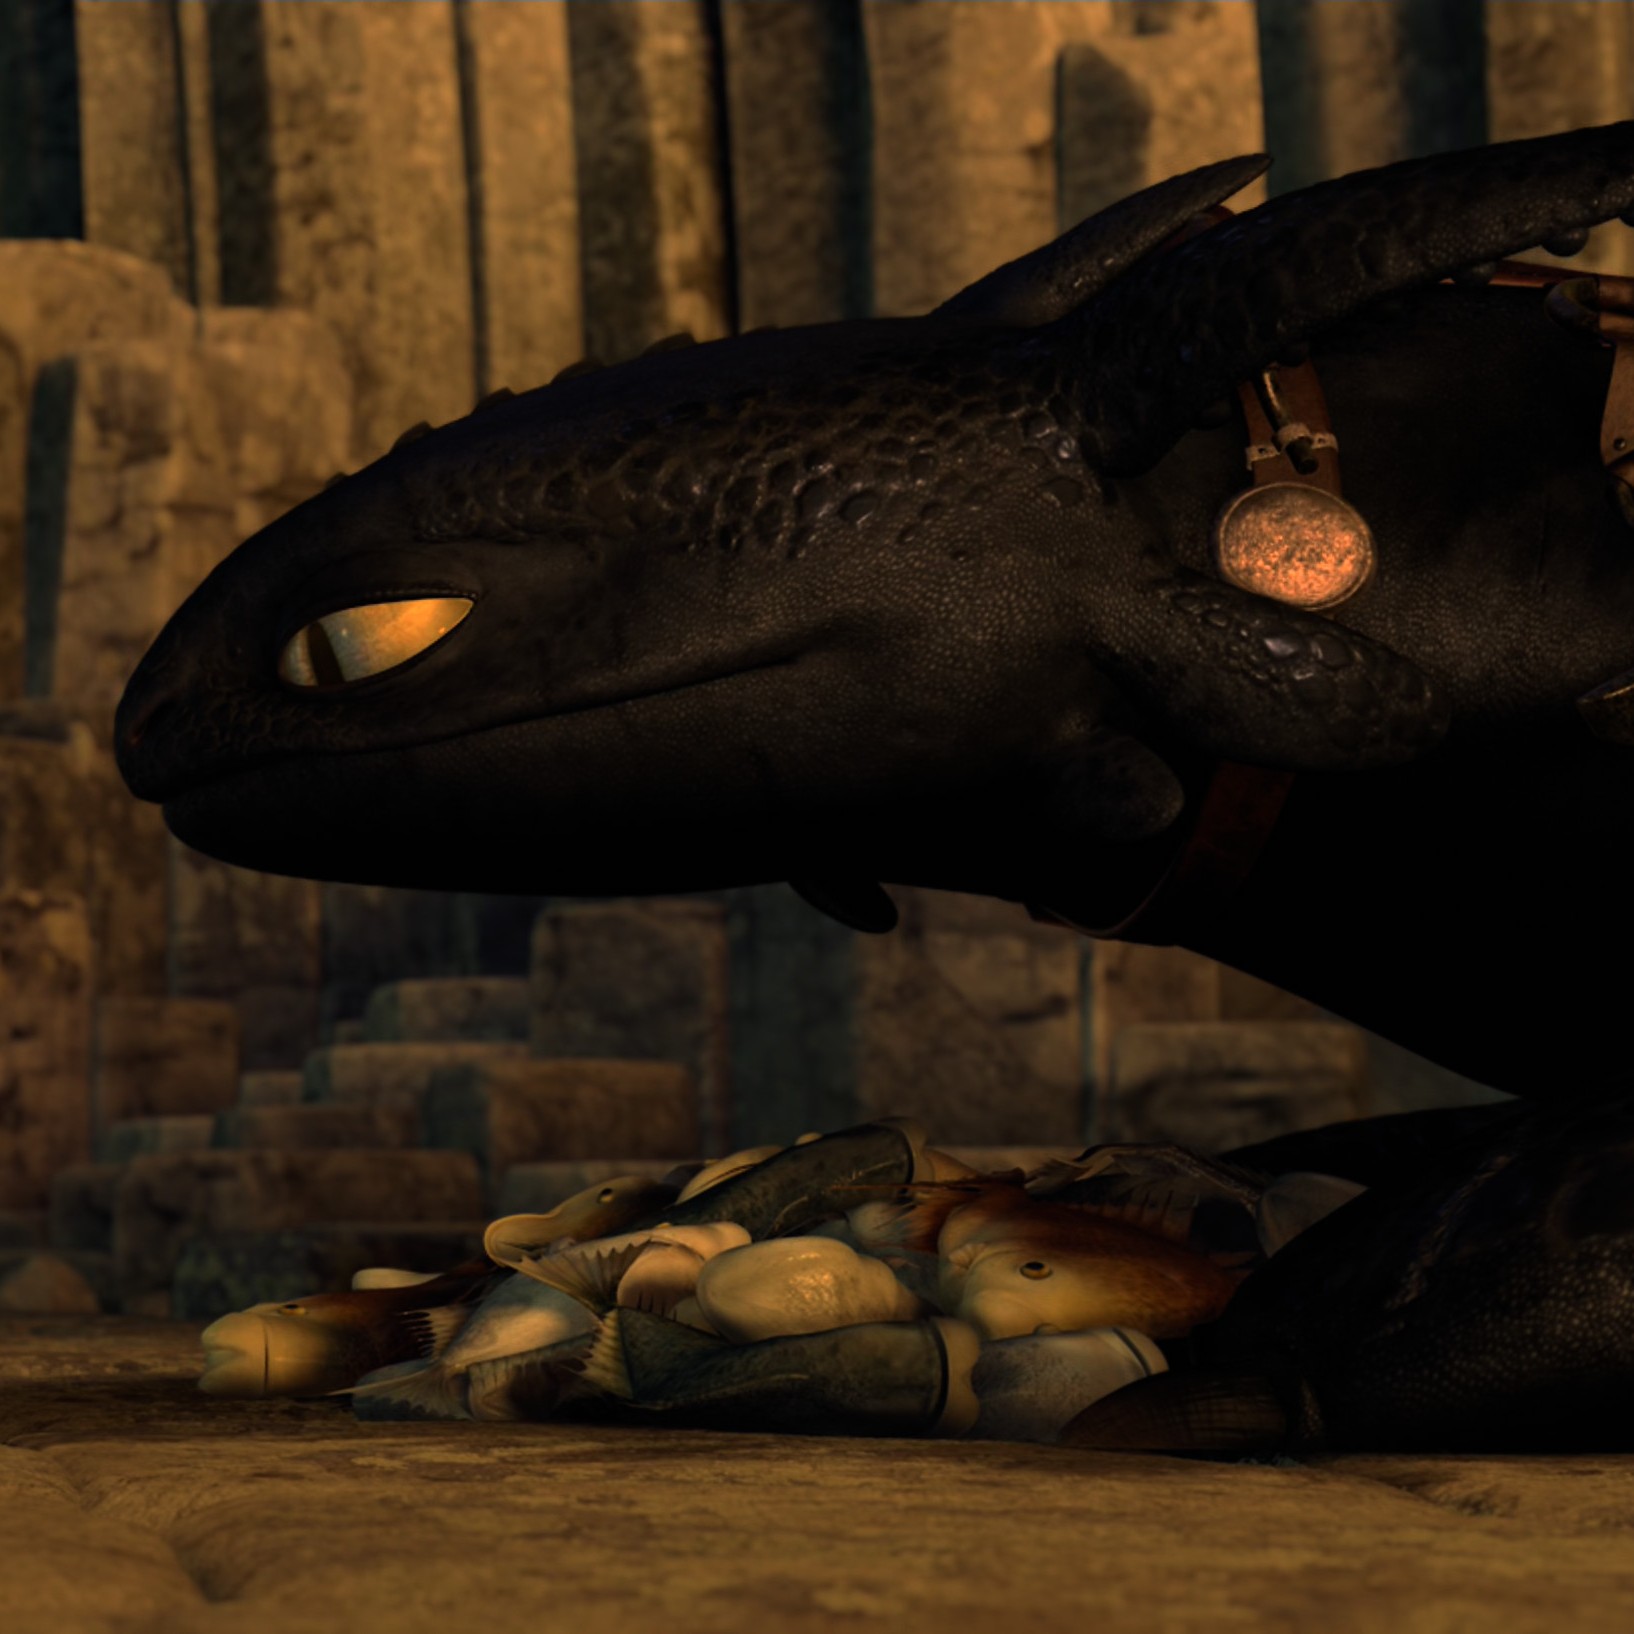 Toothless pic n°56